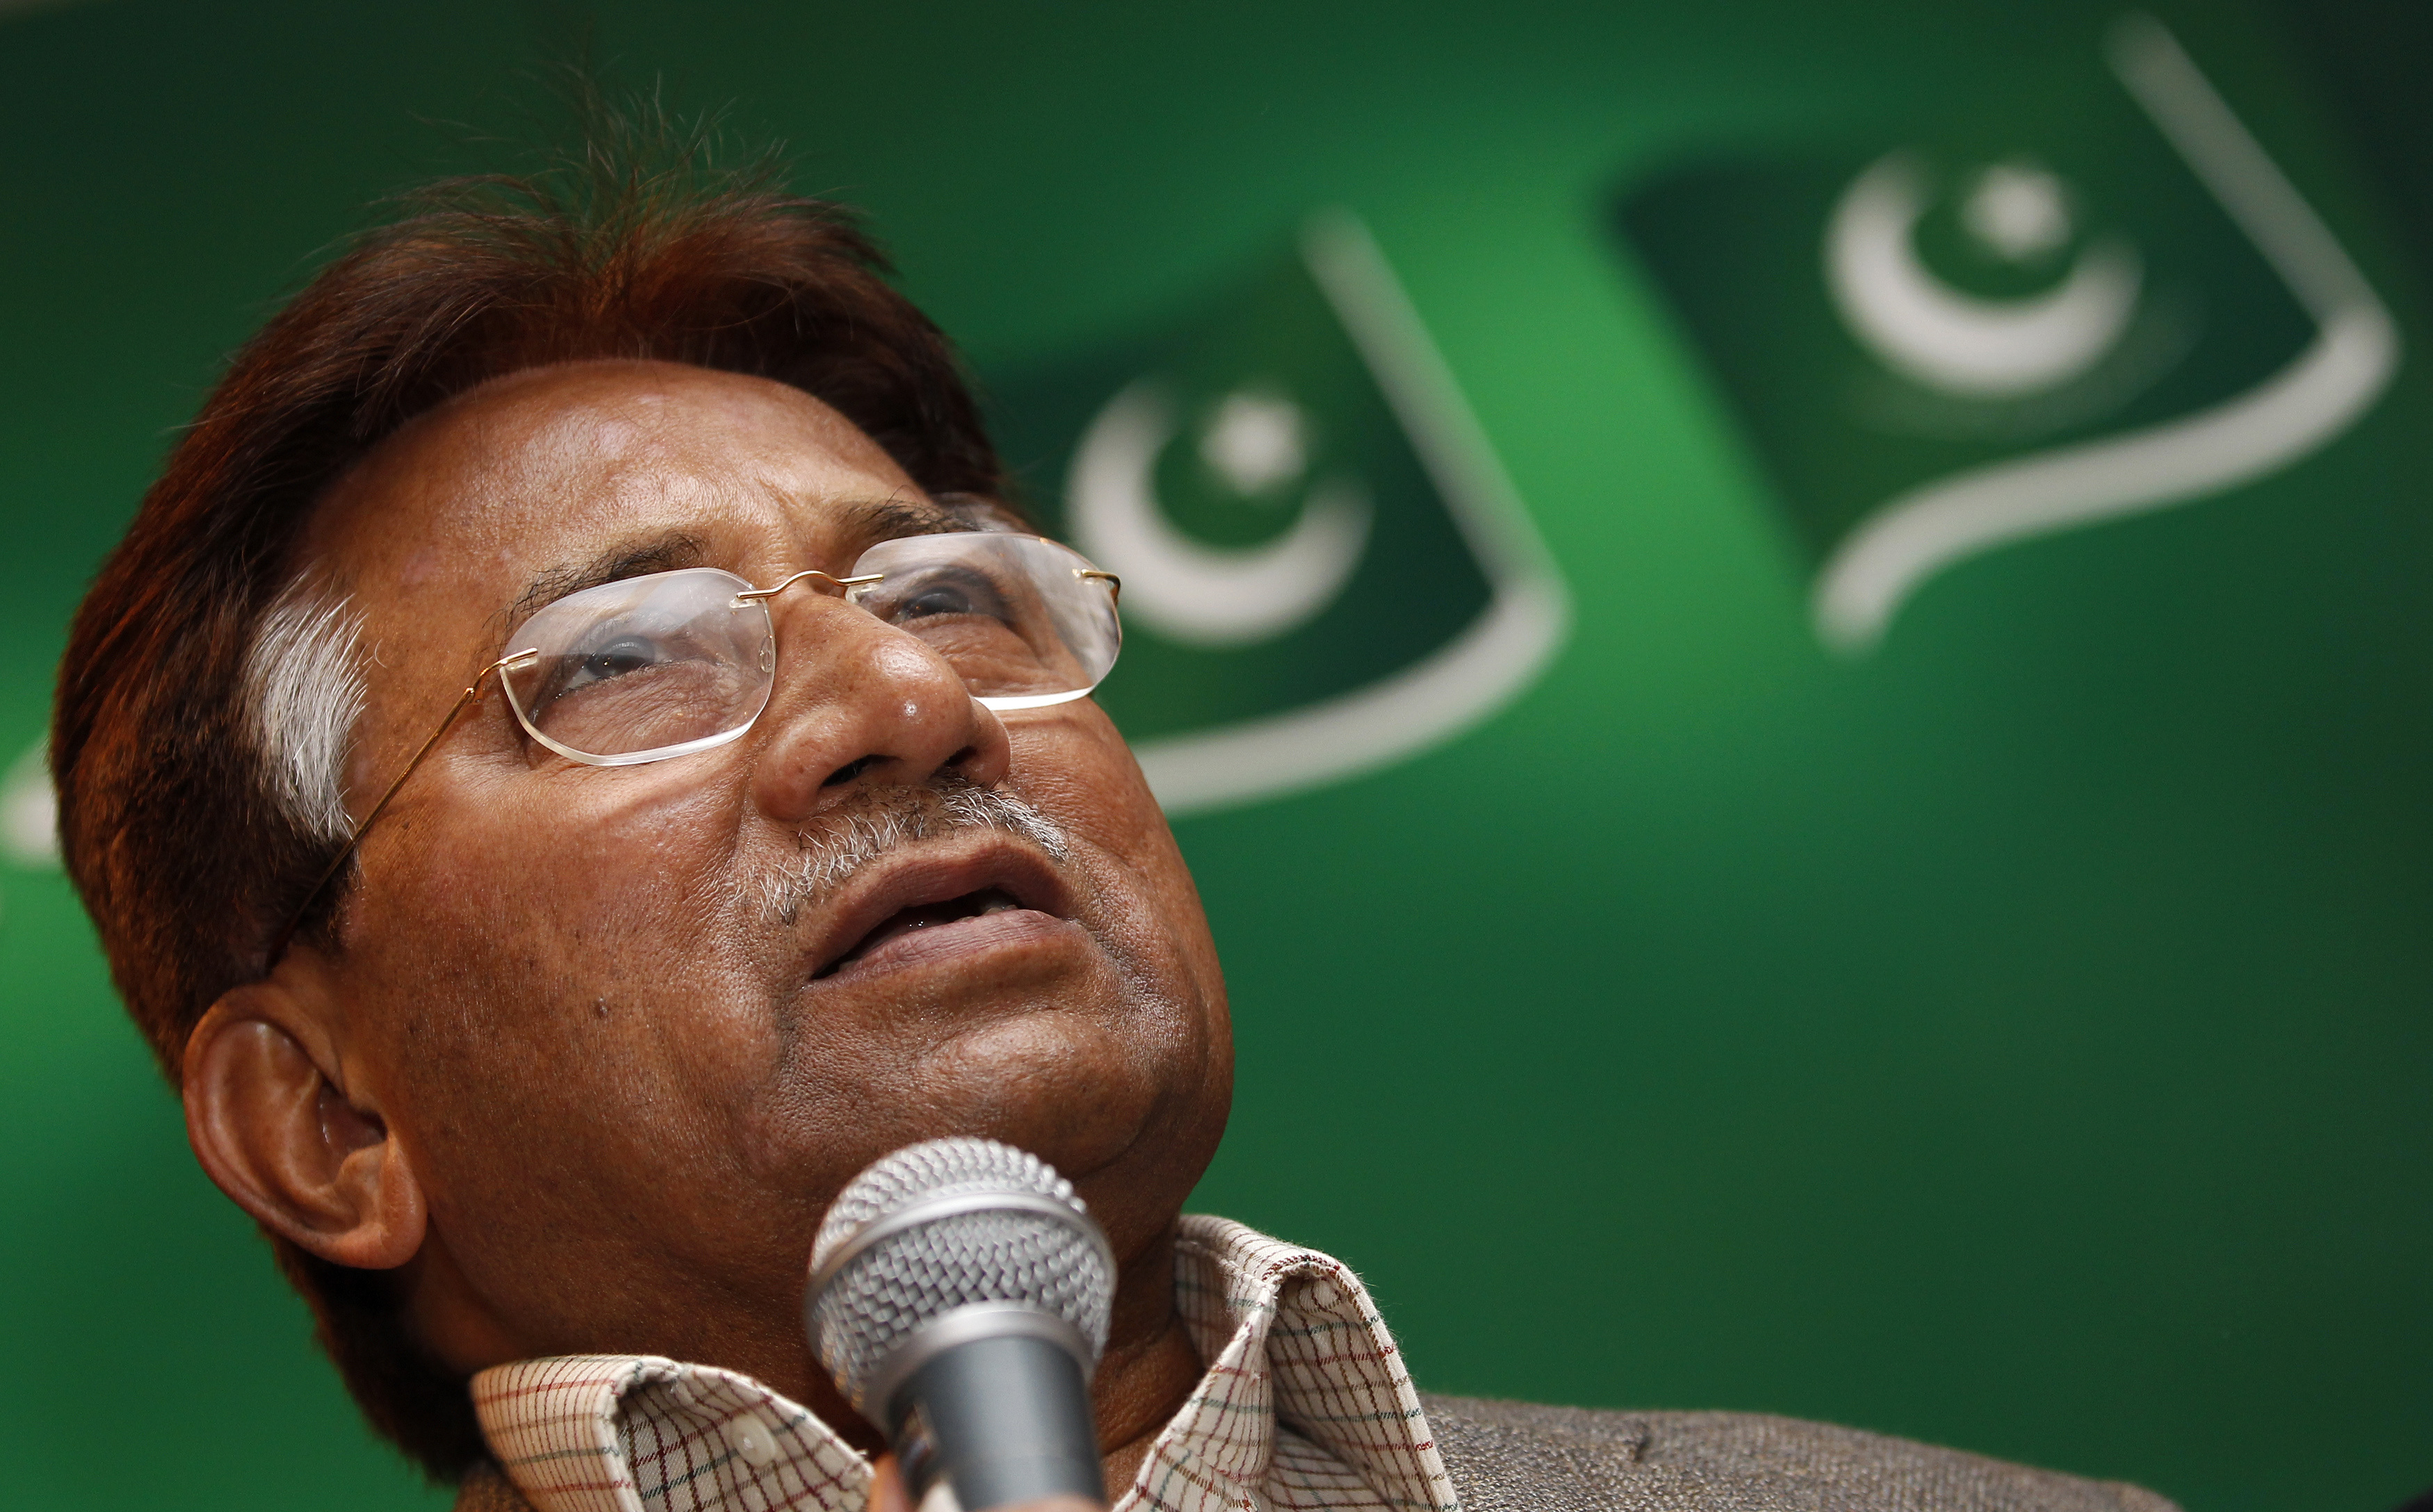 The former President of Pakistan, Pervez Musharraf,  speaks at a news conference at a branch of his political party in east London